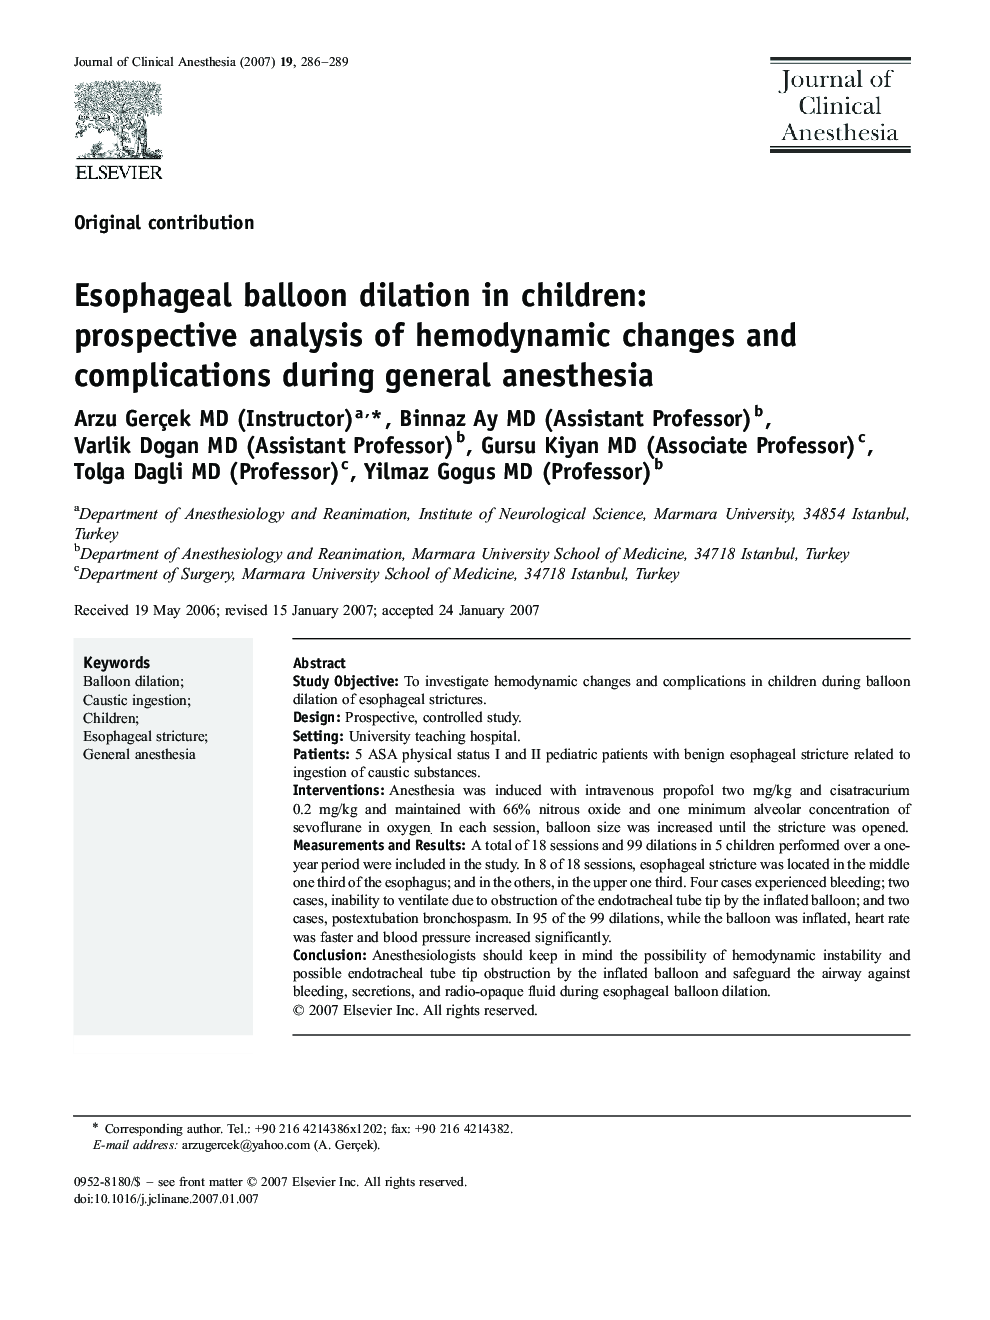 Esophageal balloon dilation in children: prospective analysis of hemodynamic changes and complications during general anesthesia